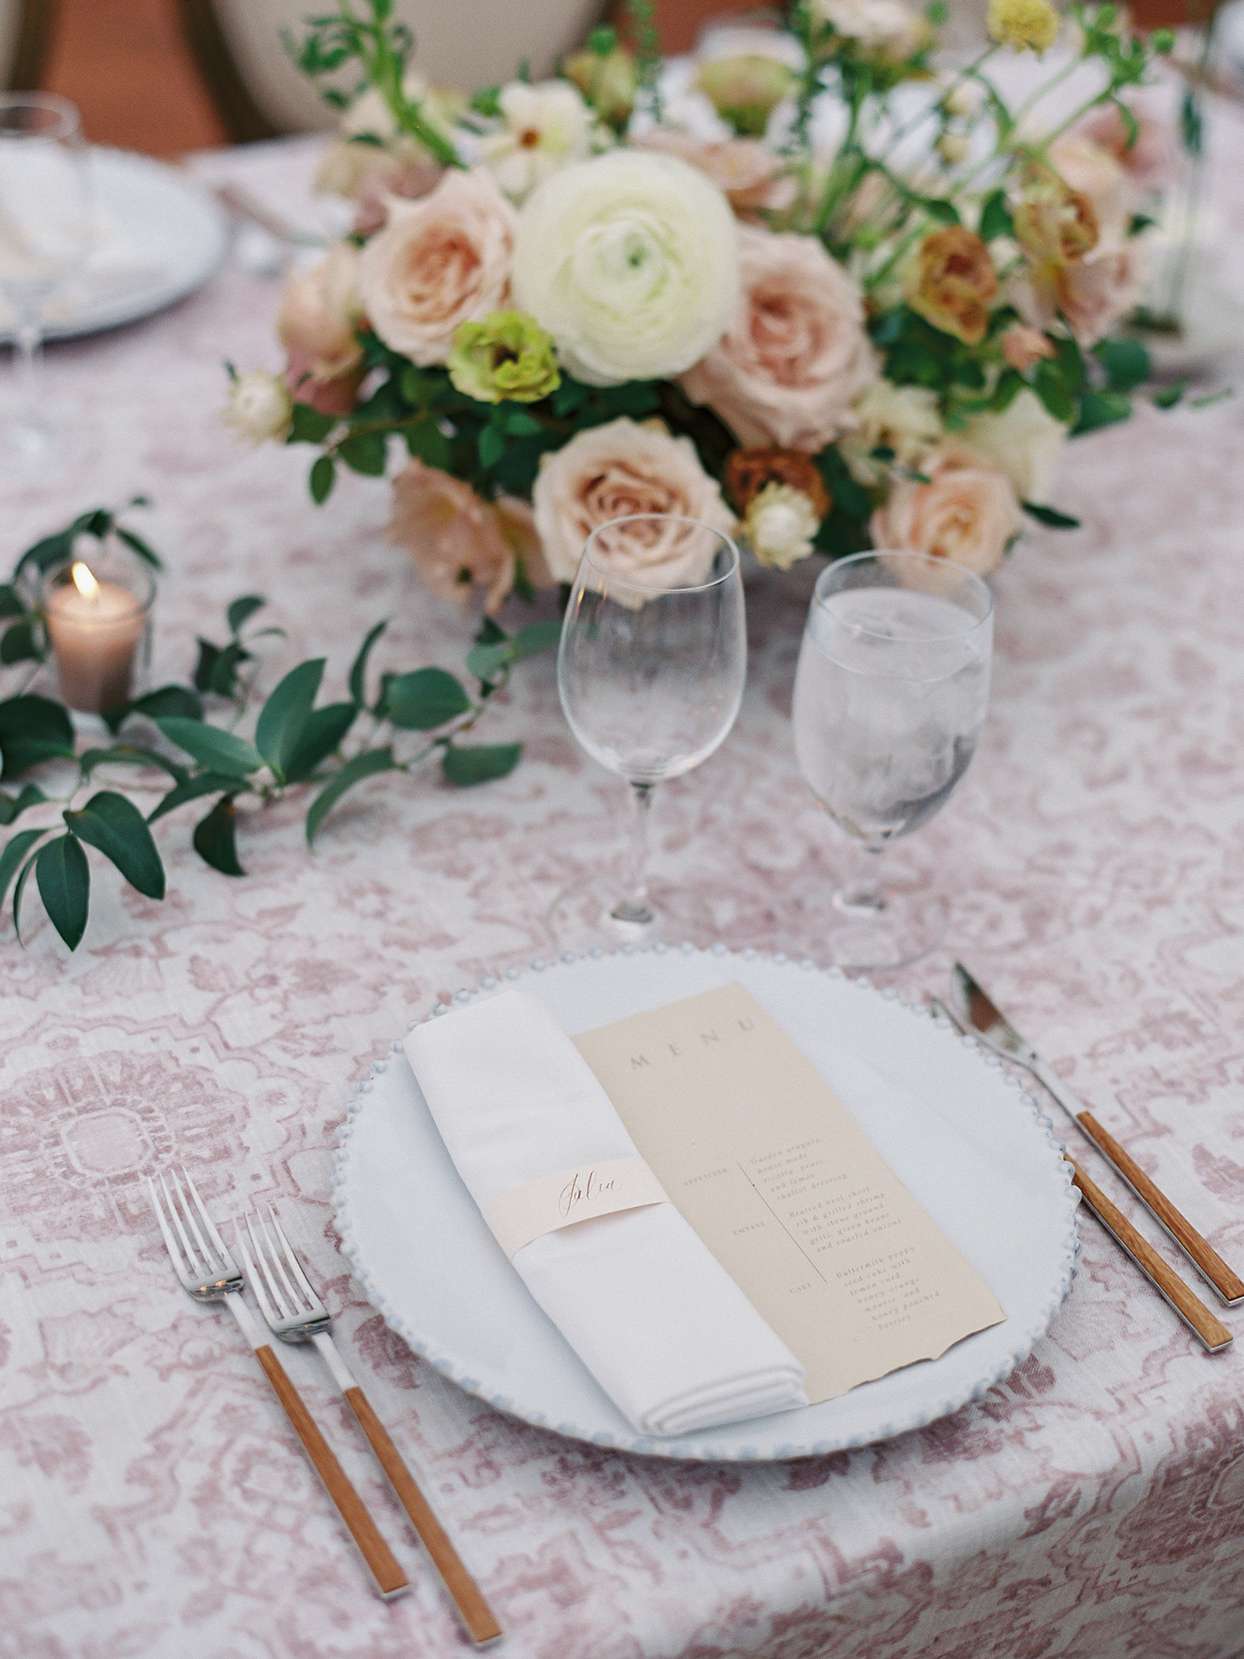 Wedding place setting with patterned linens paired with white napkins